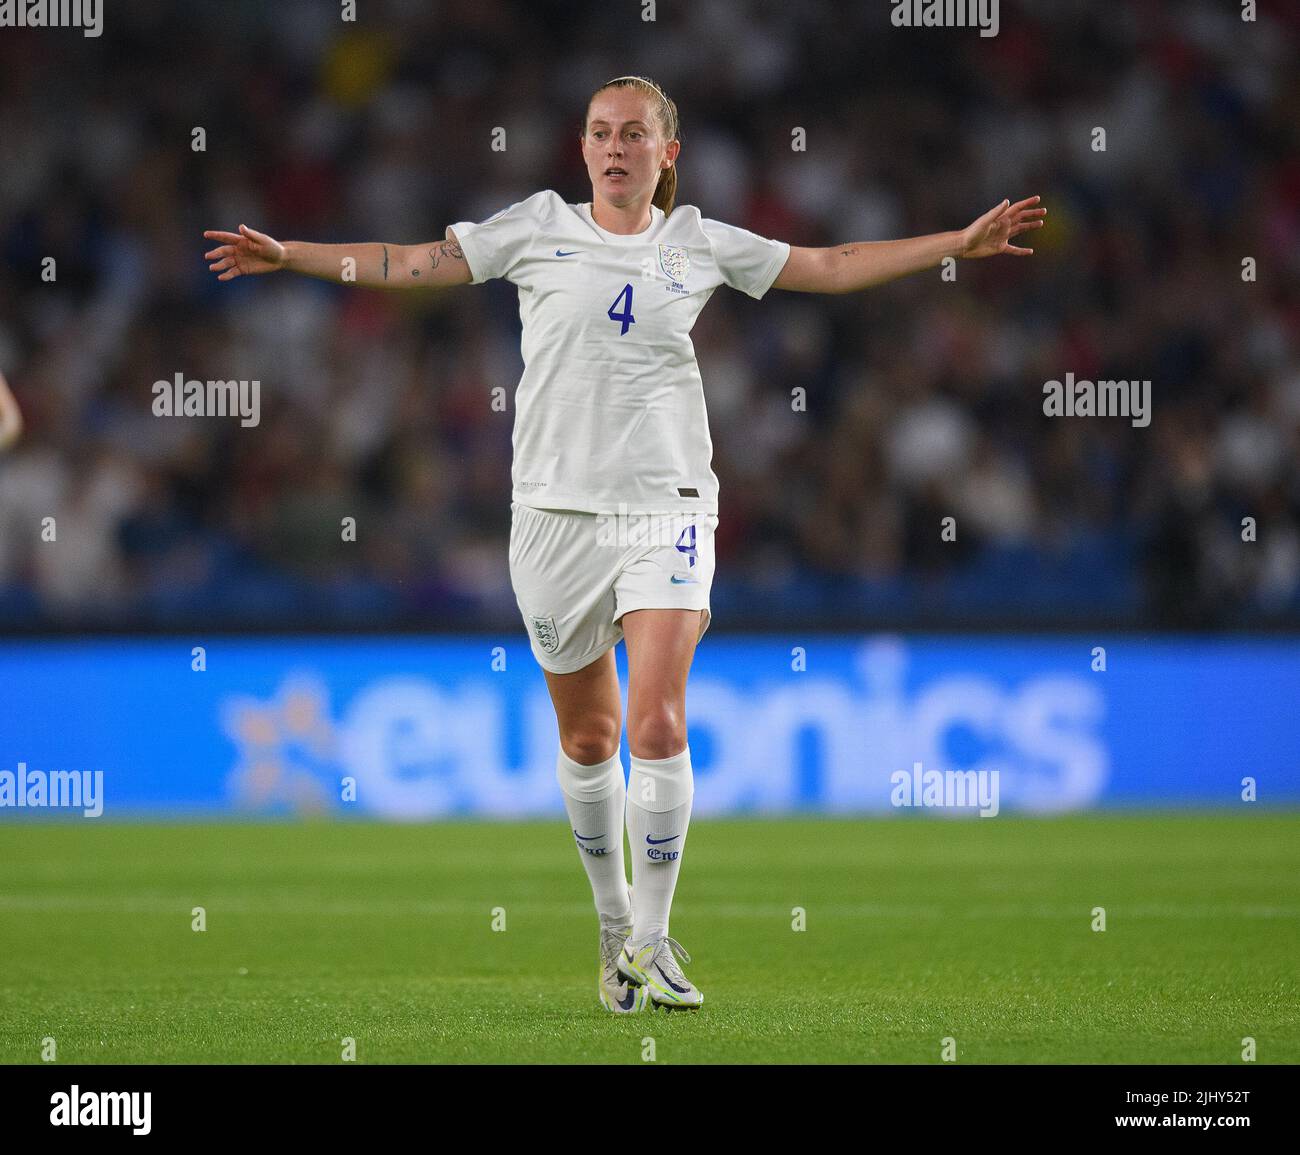 20 Jul 2022 - England v Spain - UEFA Women's Euro 2022 - Quarter Final - Brighton & Hove Community Stadium  England's Keira Walsh during the match against Spain.  Picture Credit : © Mark Pain / Alamy Live News Stock Photo